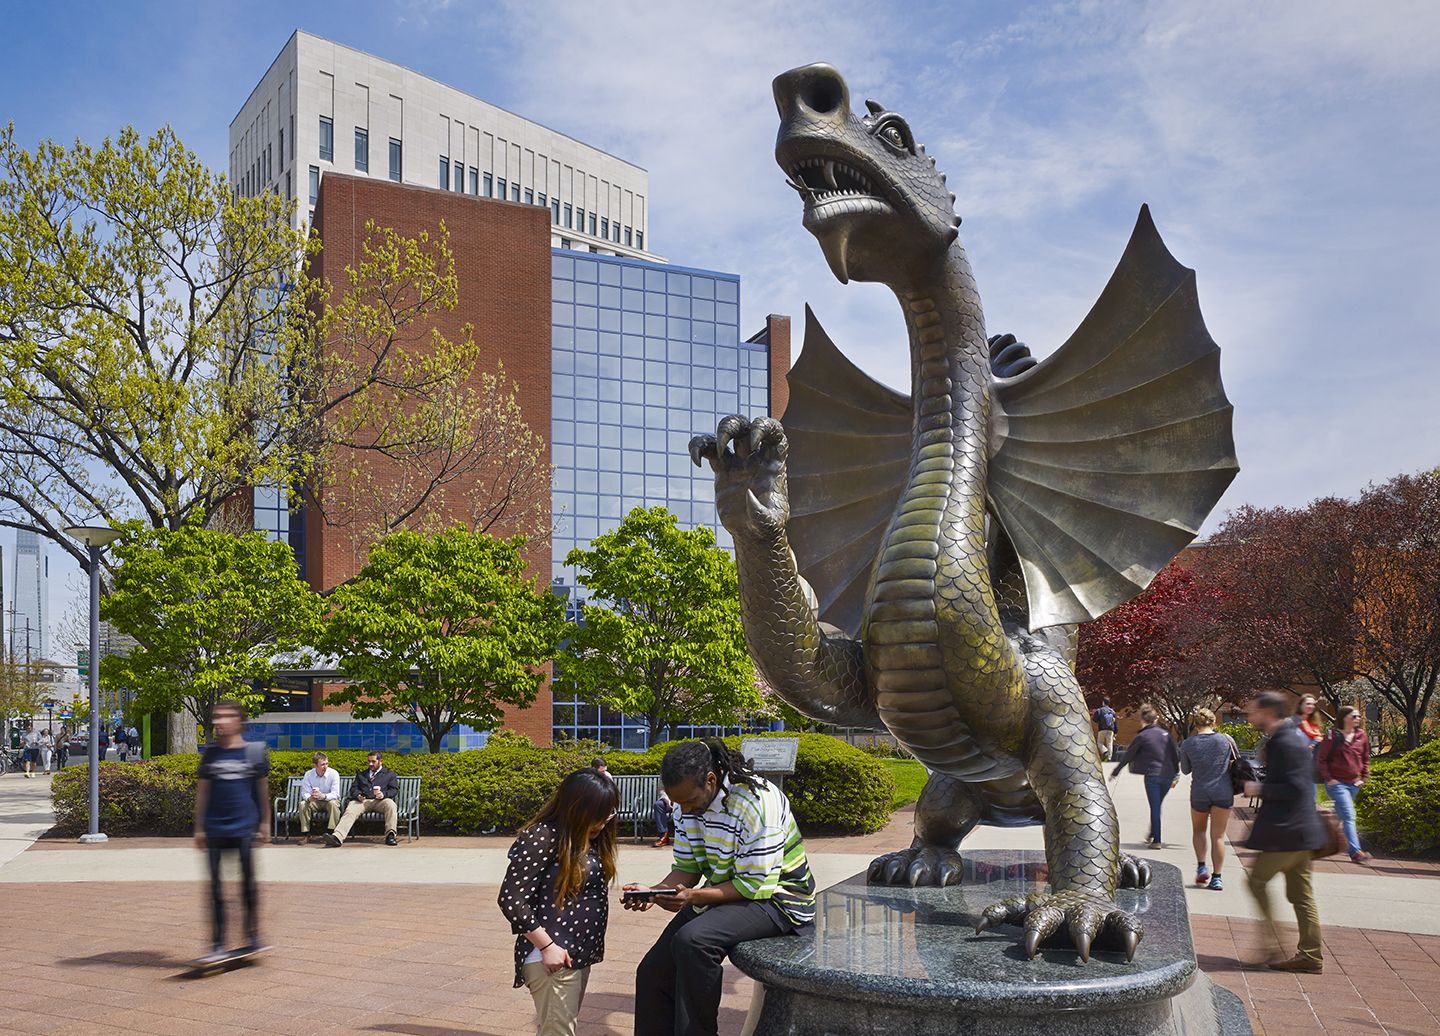 Students walking next to the dragon statue at Drexel University.